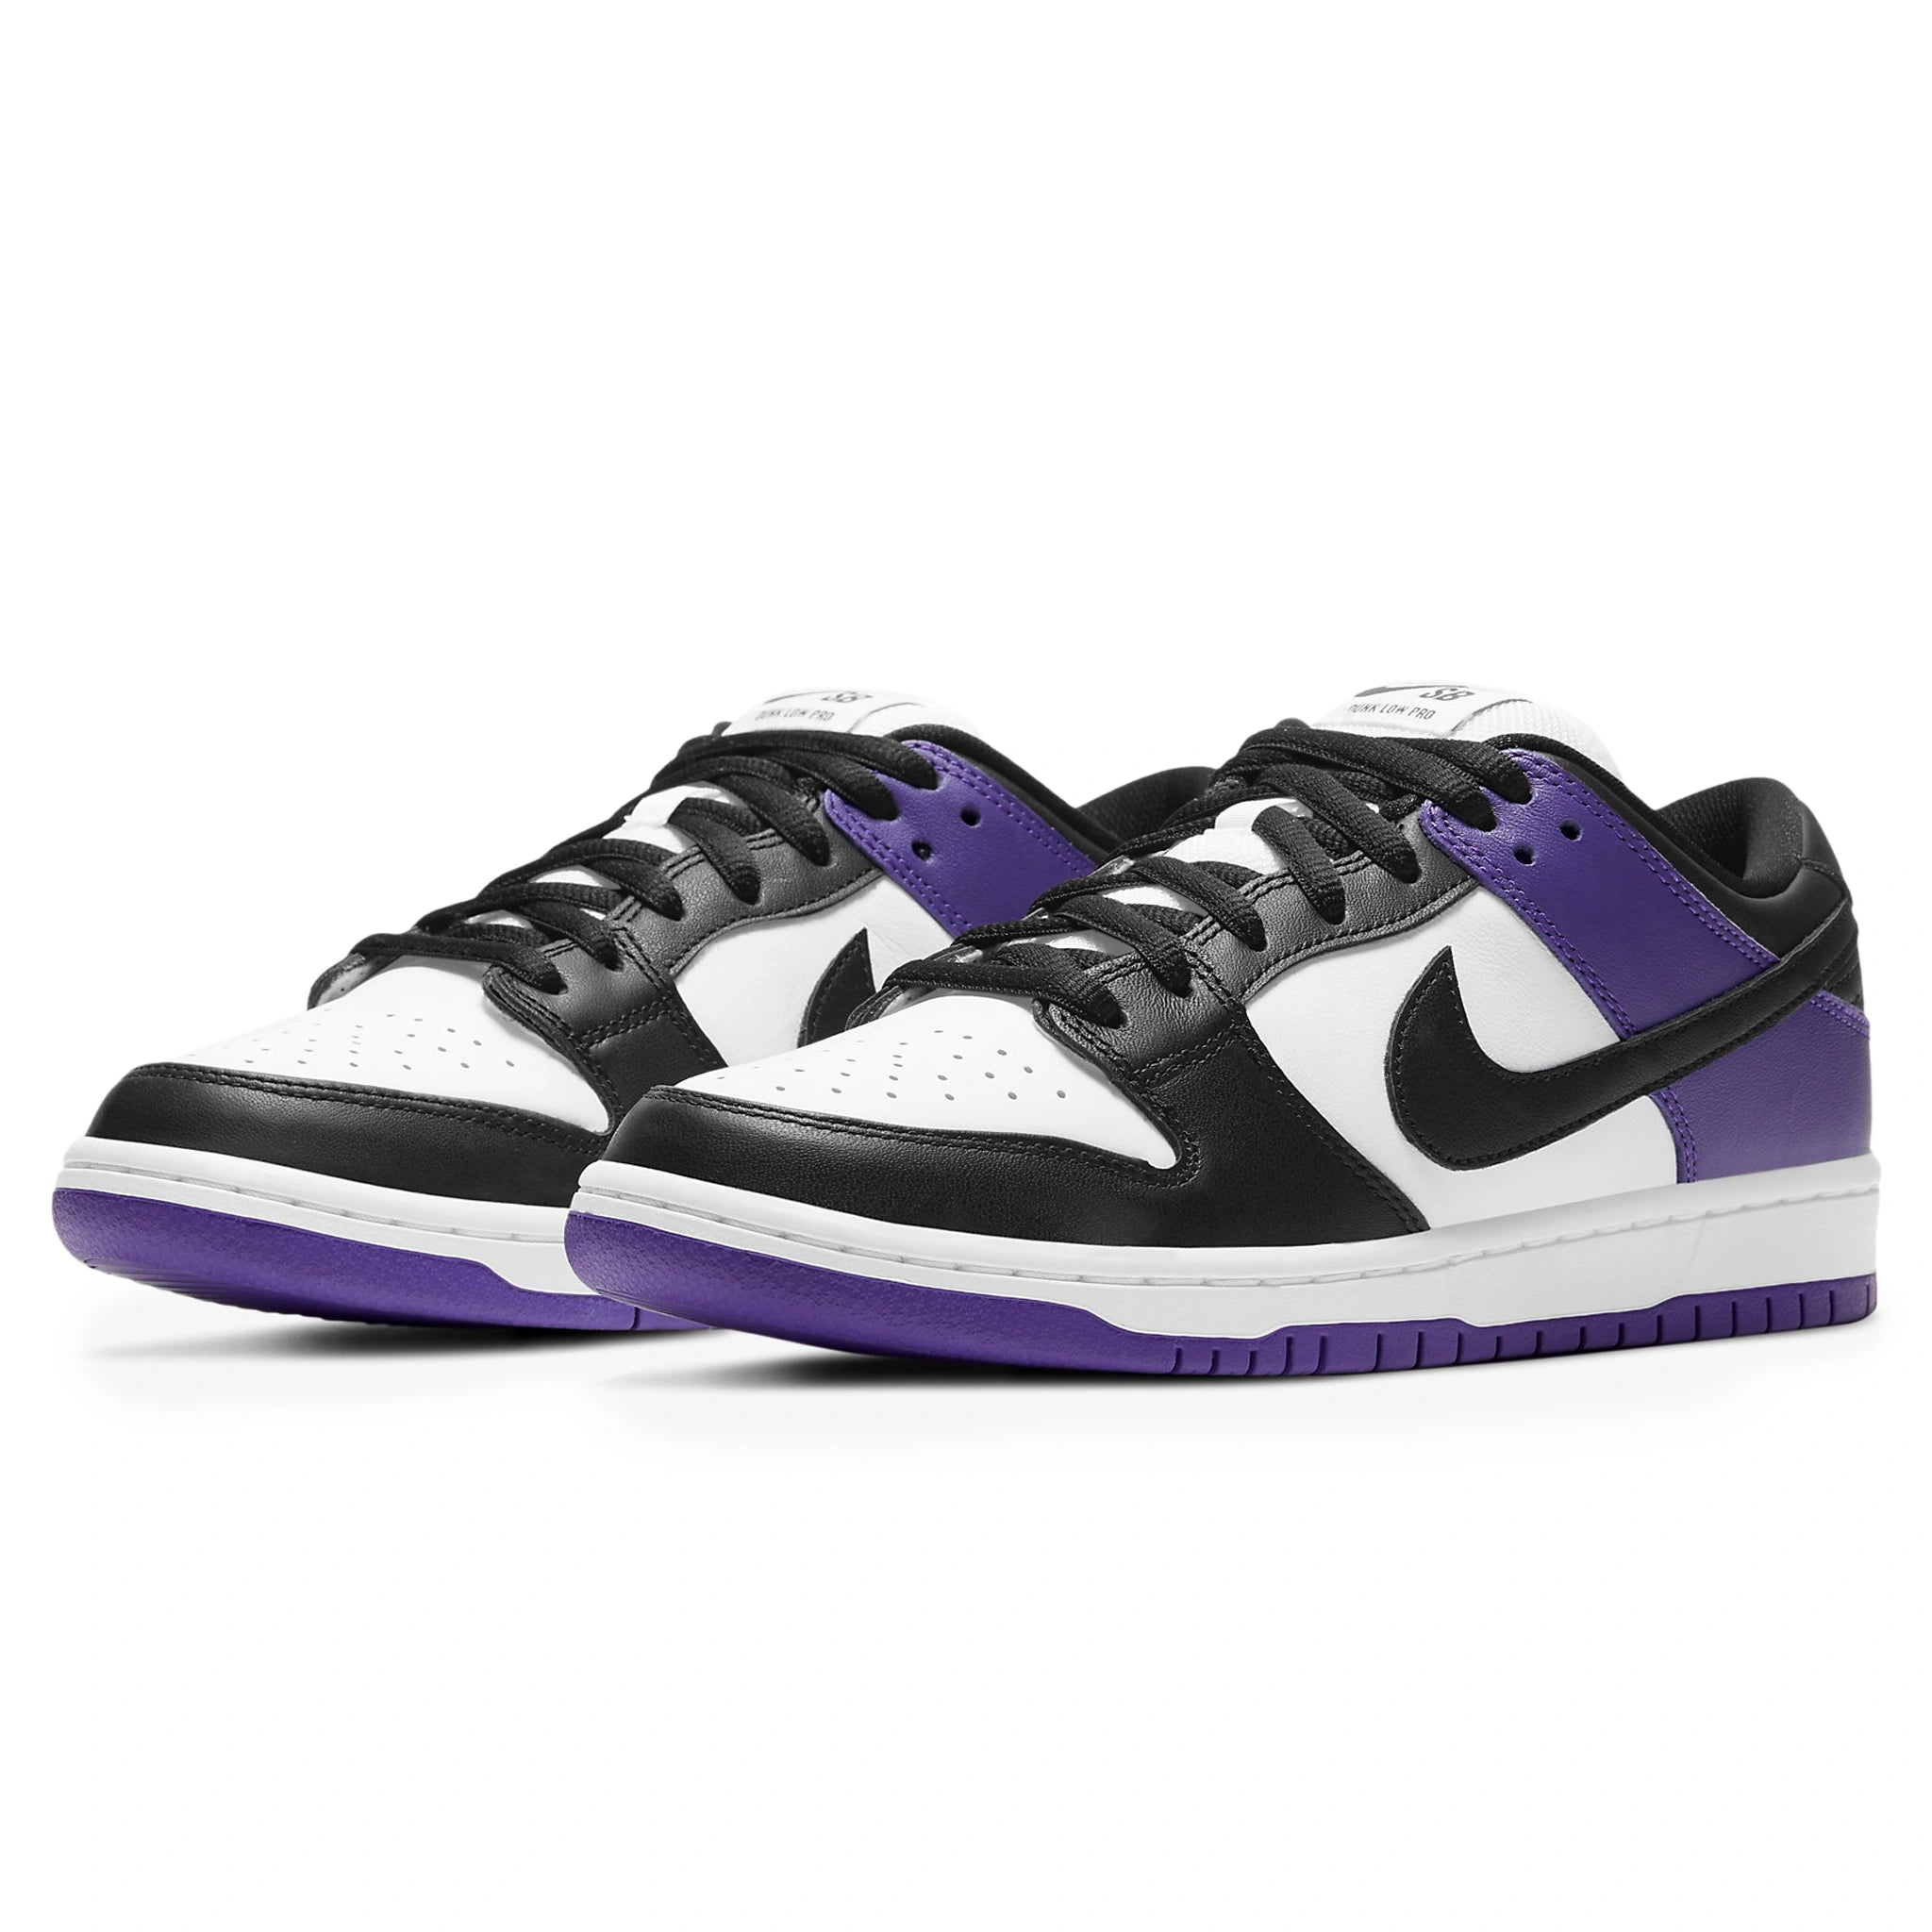 Front side view of Nike SB Dunk Low Court Purple BQ6817-500